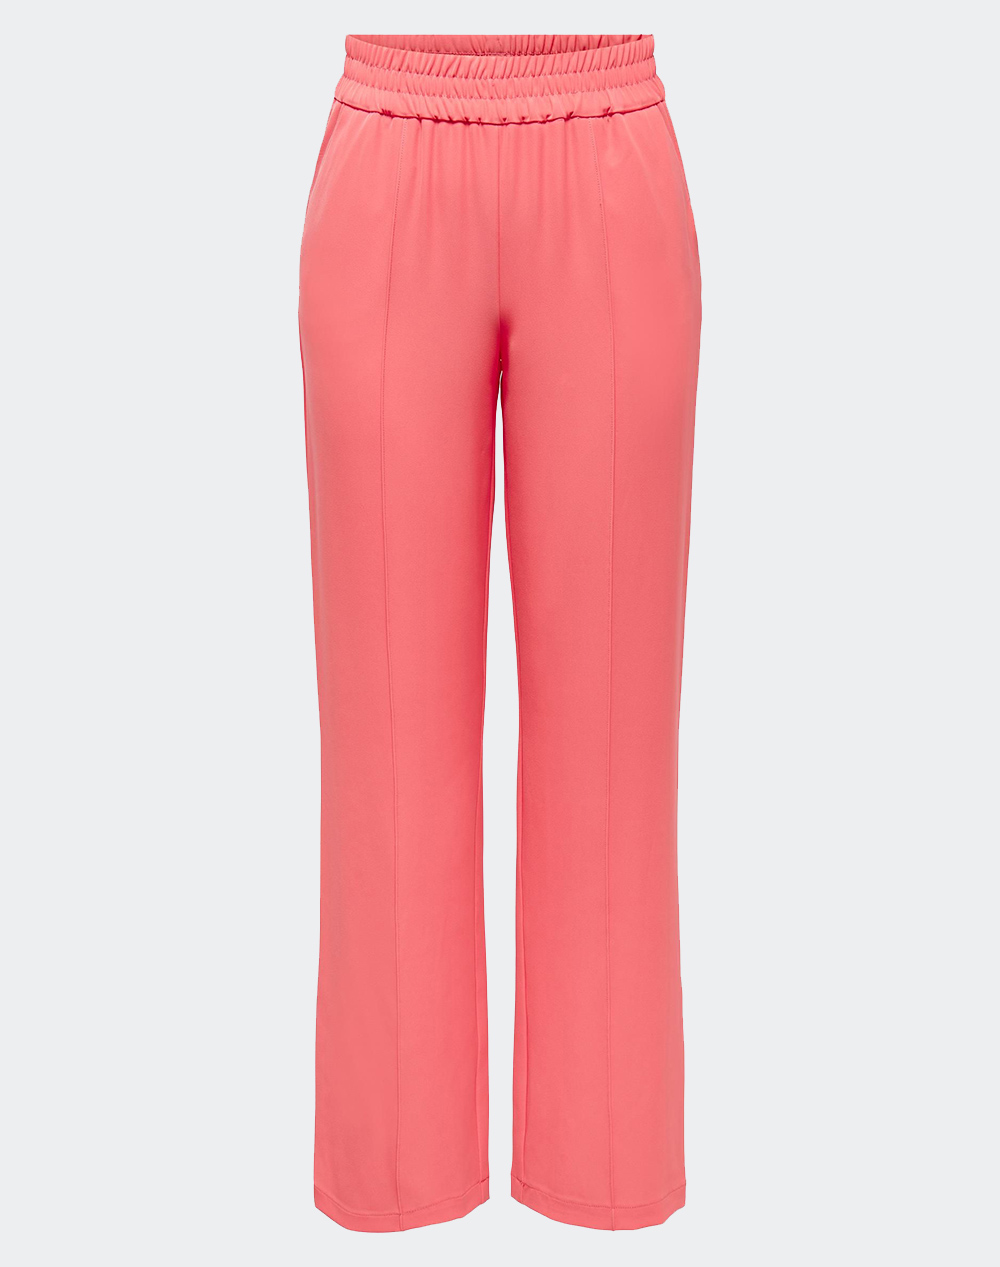 ONLY ONLLUCY-LAURA MW WIDE PIN PANT TLR NOOS 15269665-Georgia Peach Coral 0410AONLY2010121_XR12186